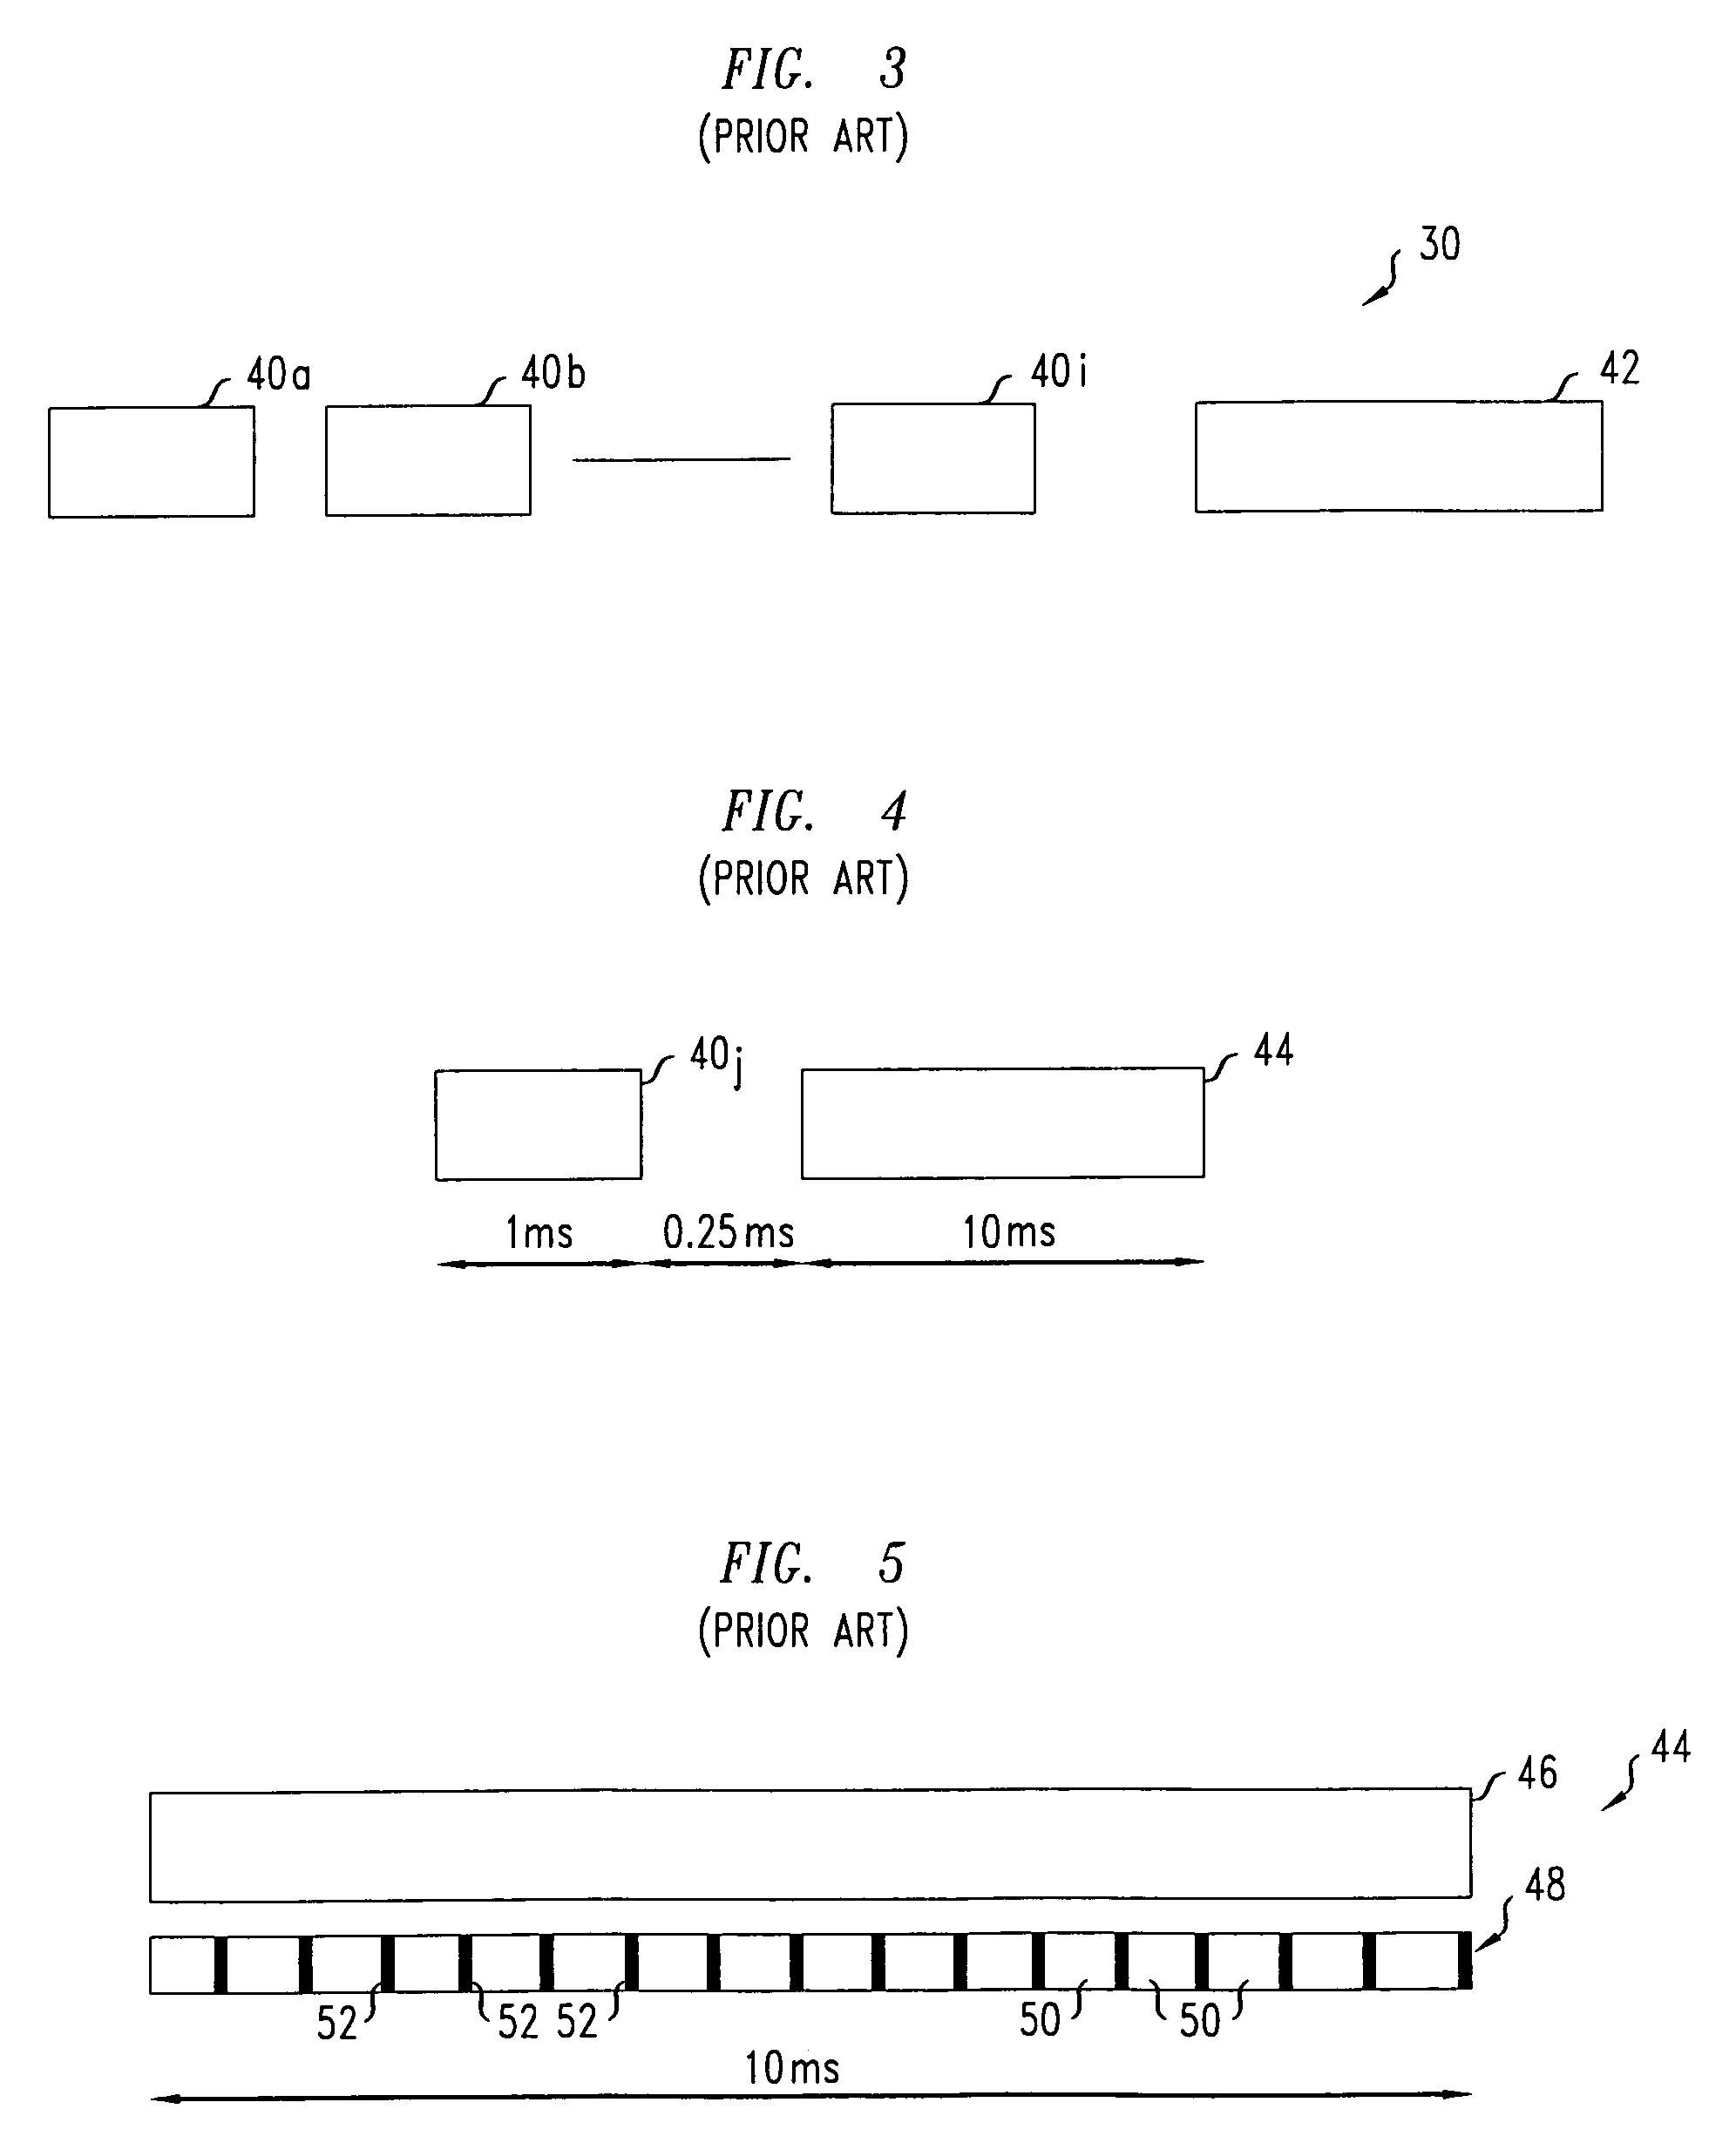 Message access for radio telecommunications system